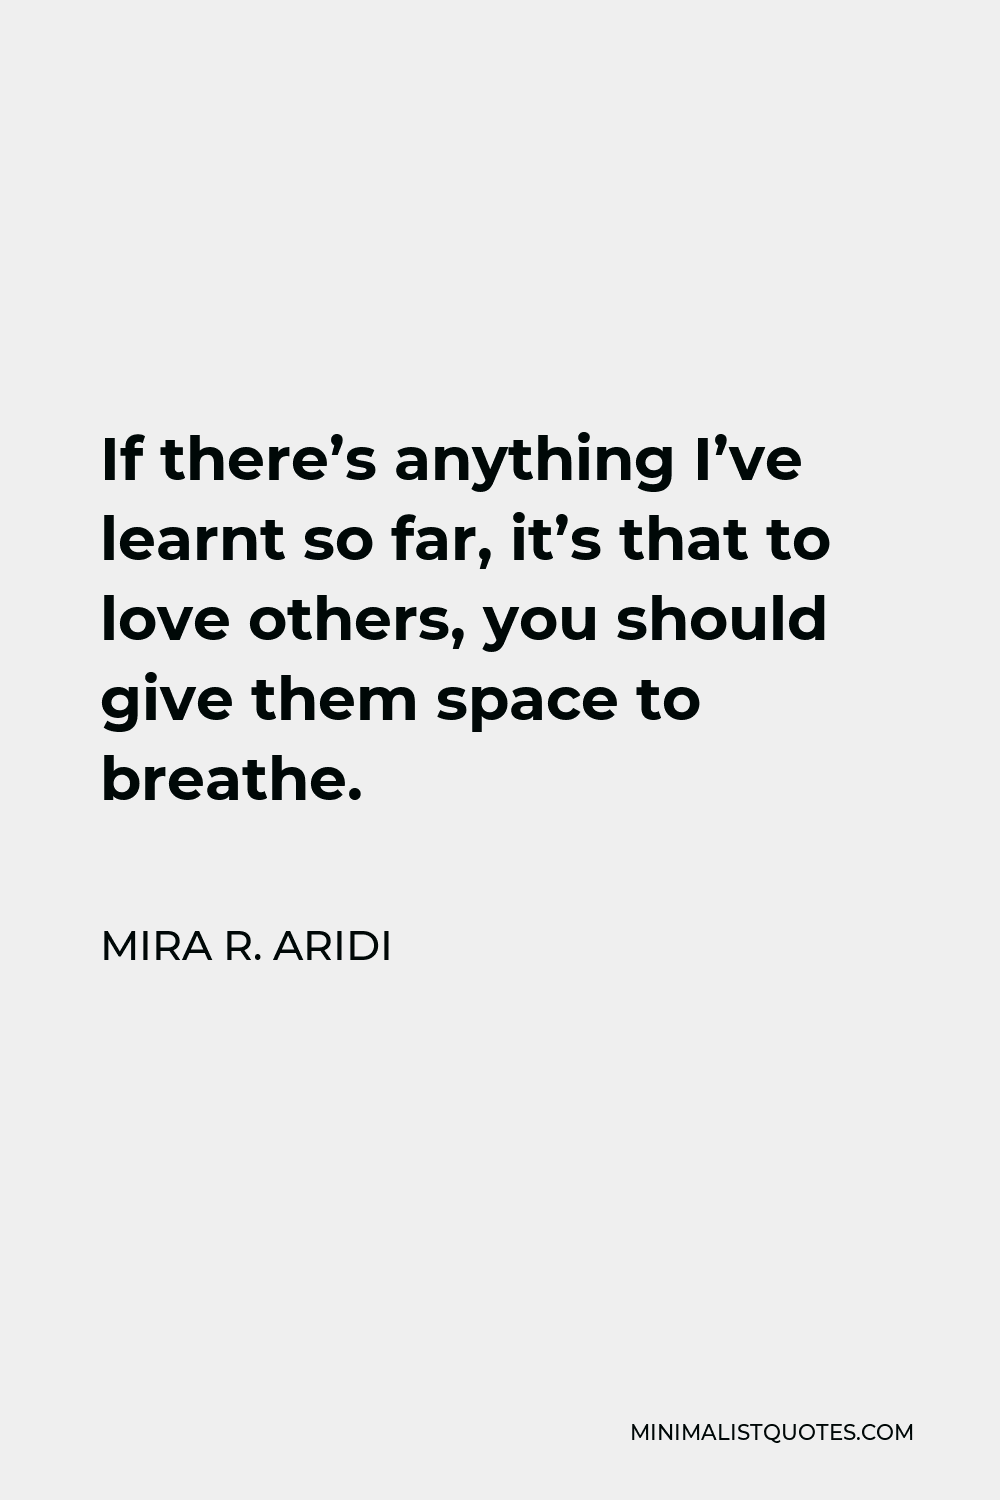 Mira R. Aridi Quote - If there’s anything I’ve learnt so far, it’s that to love others, you should give them space to breathe.